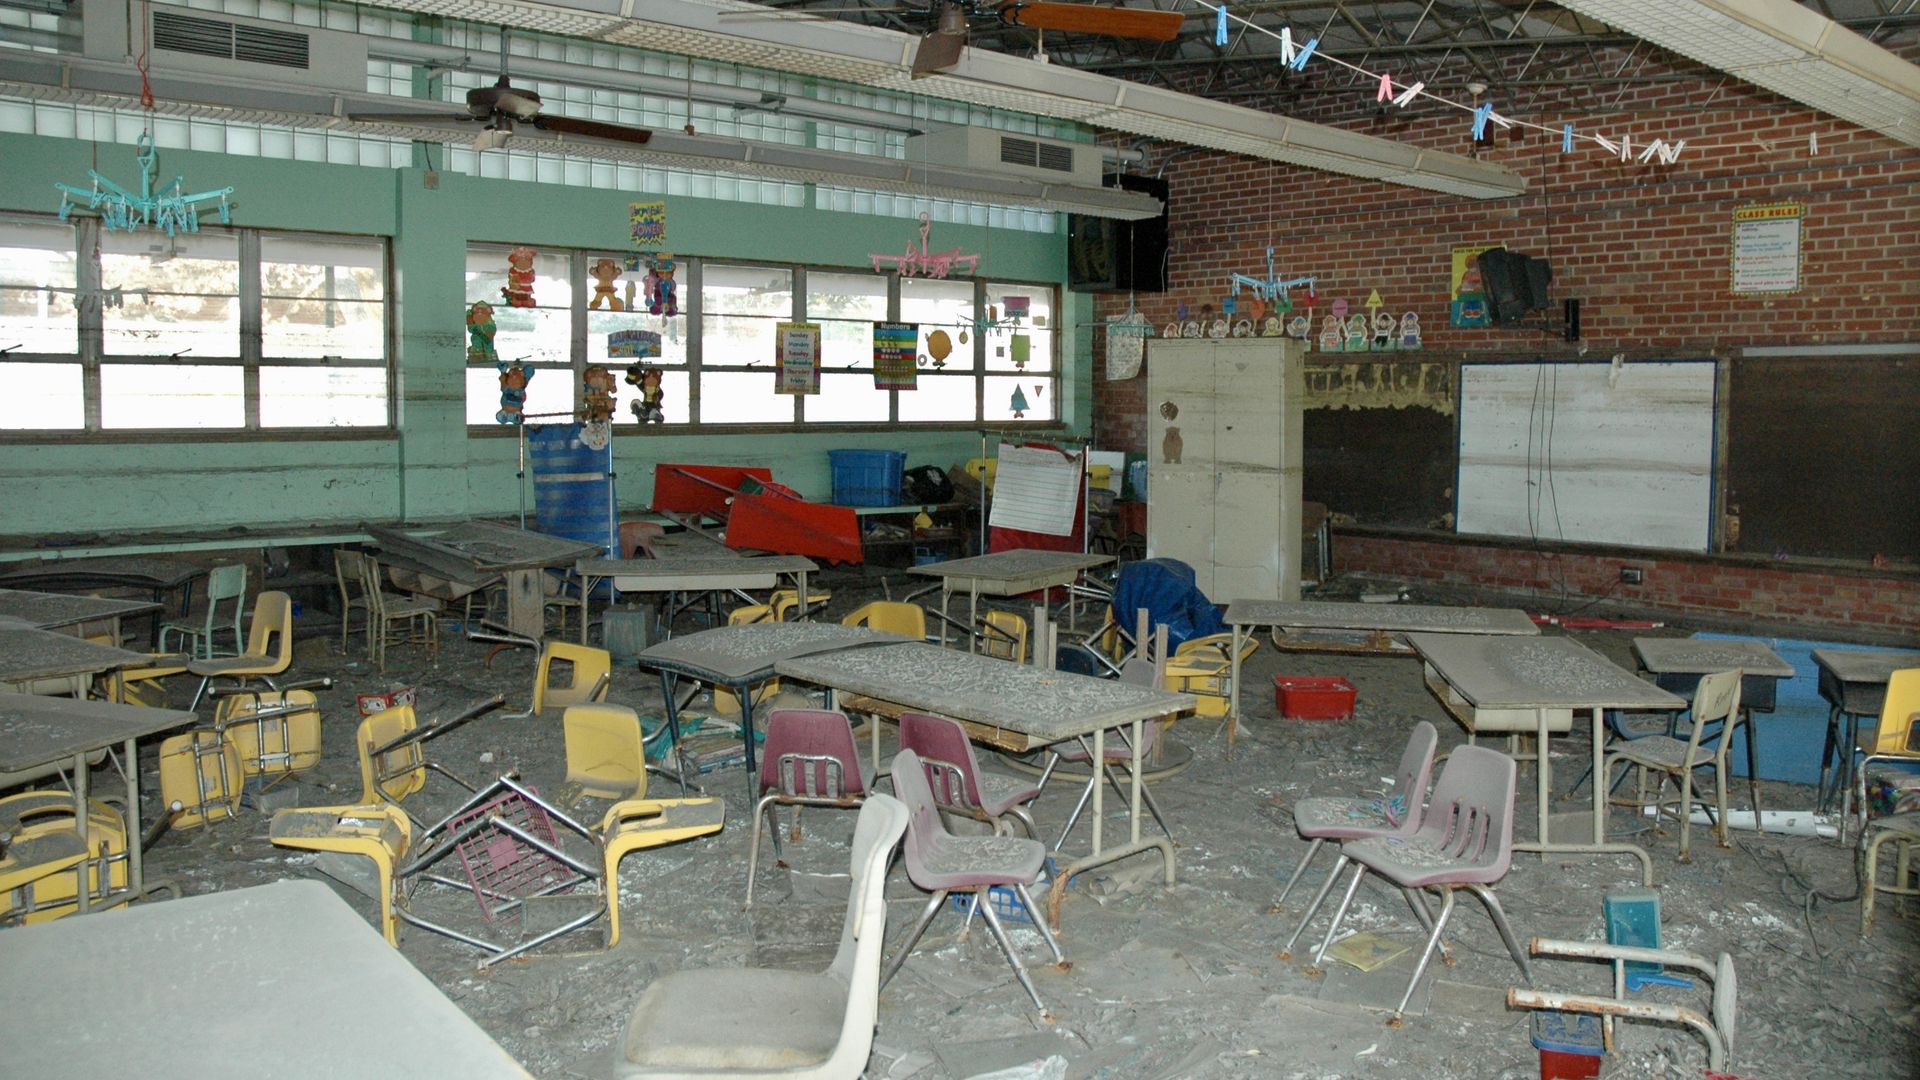 Photo shows a dirty classroom with chairs knocked over and grime everywhere